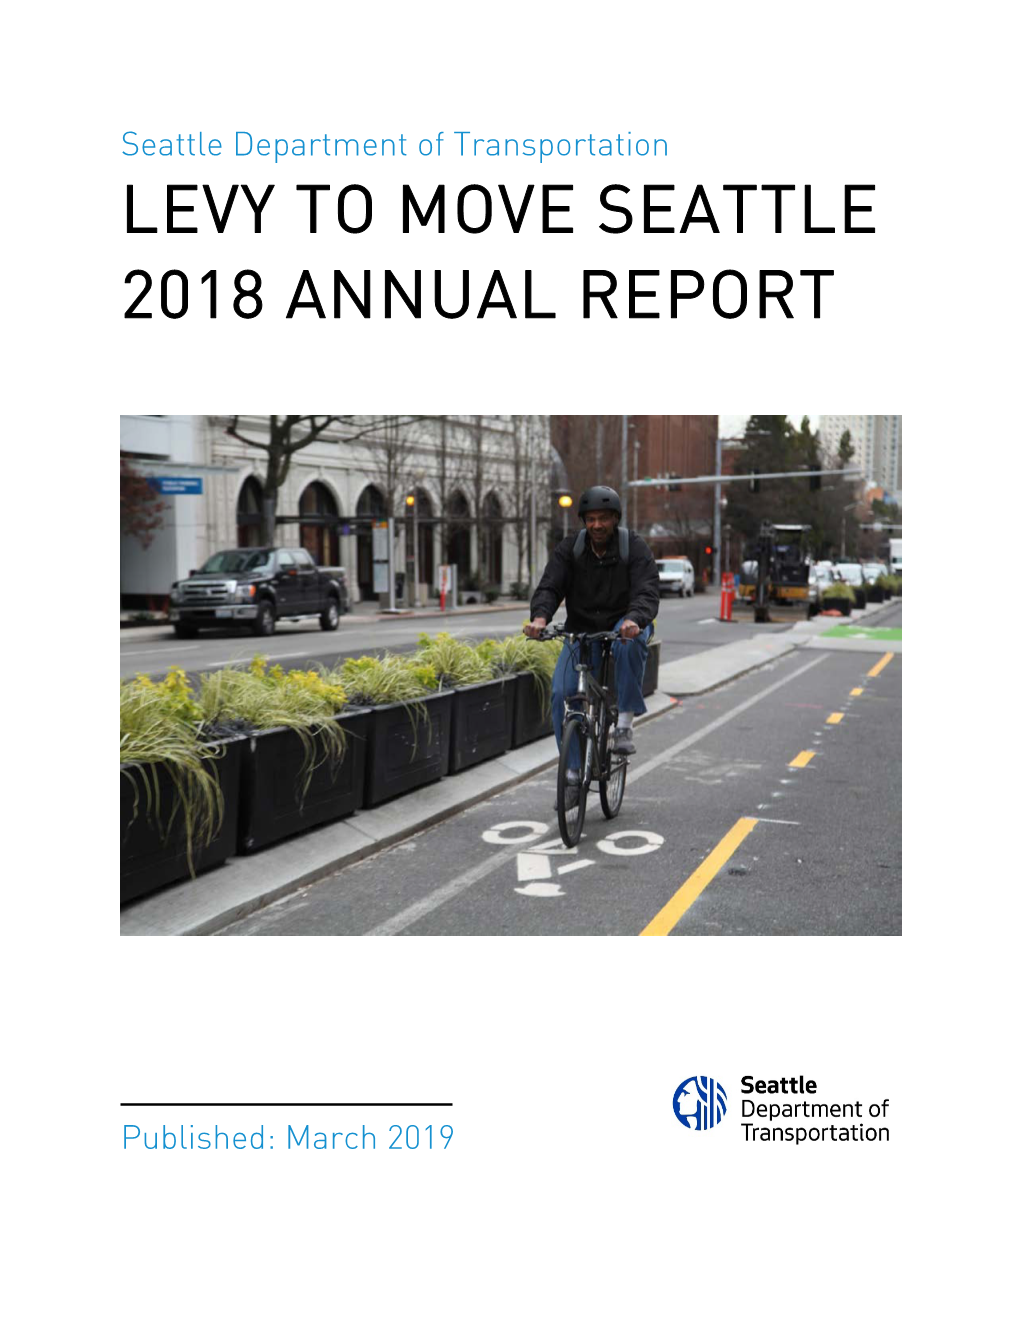 Levy to Move Seattle 2018 Annual Report